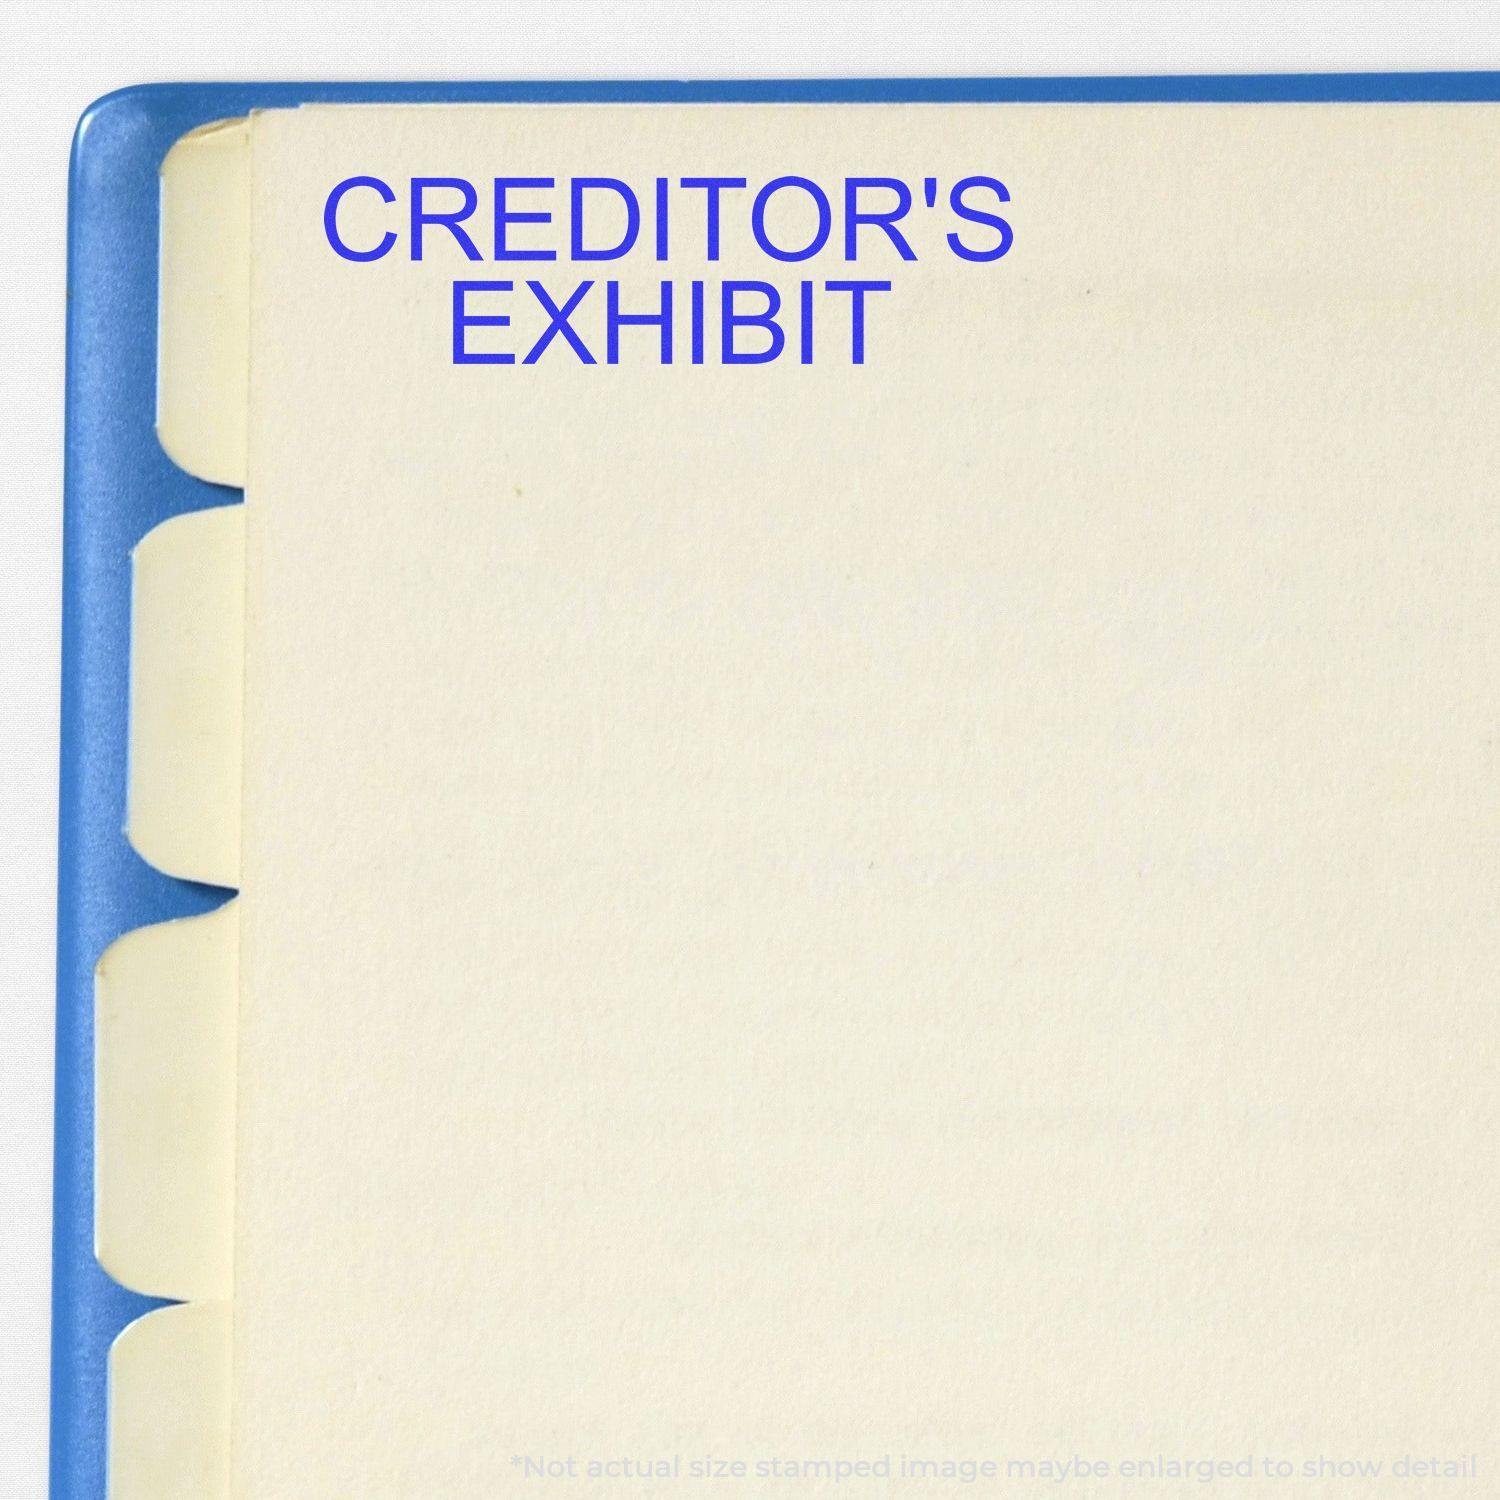 A stock office pre-inked stamp with a stamped image showing how the text "CREDITOR'S EXHIBIT" is displayed after stamping.